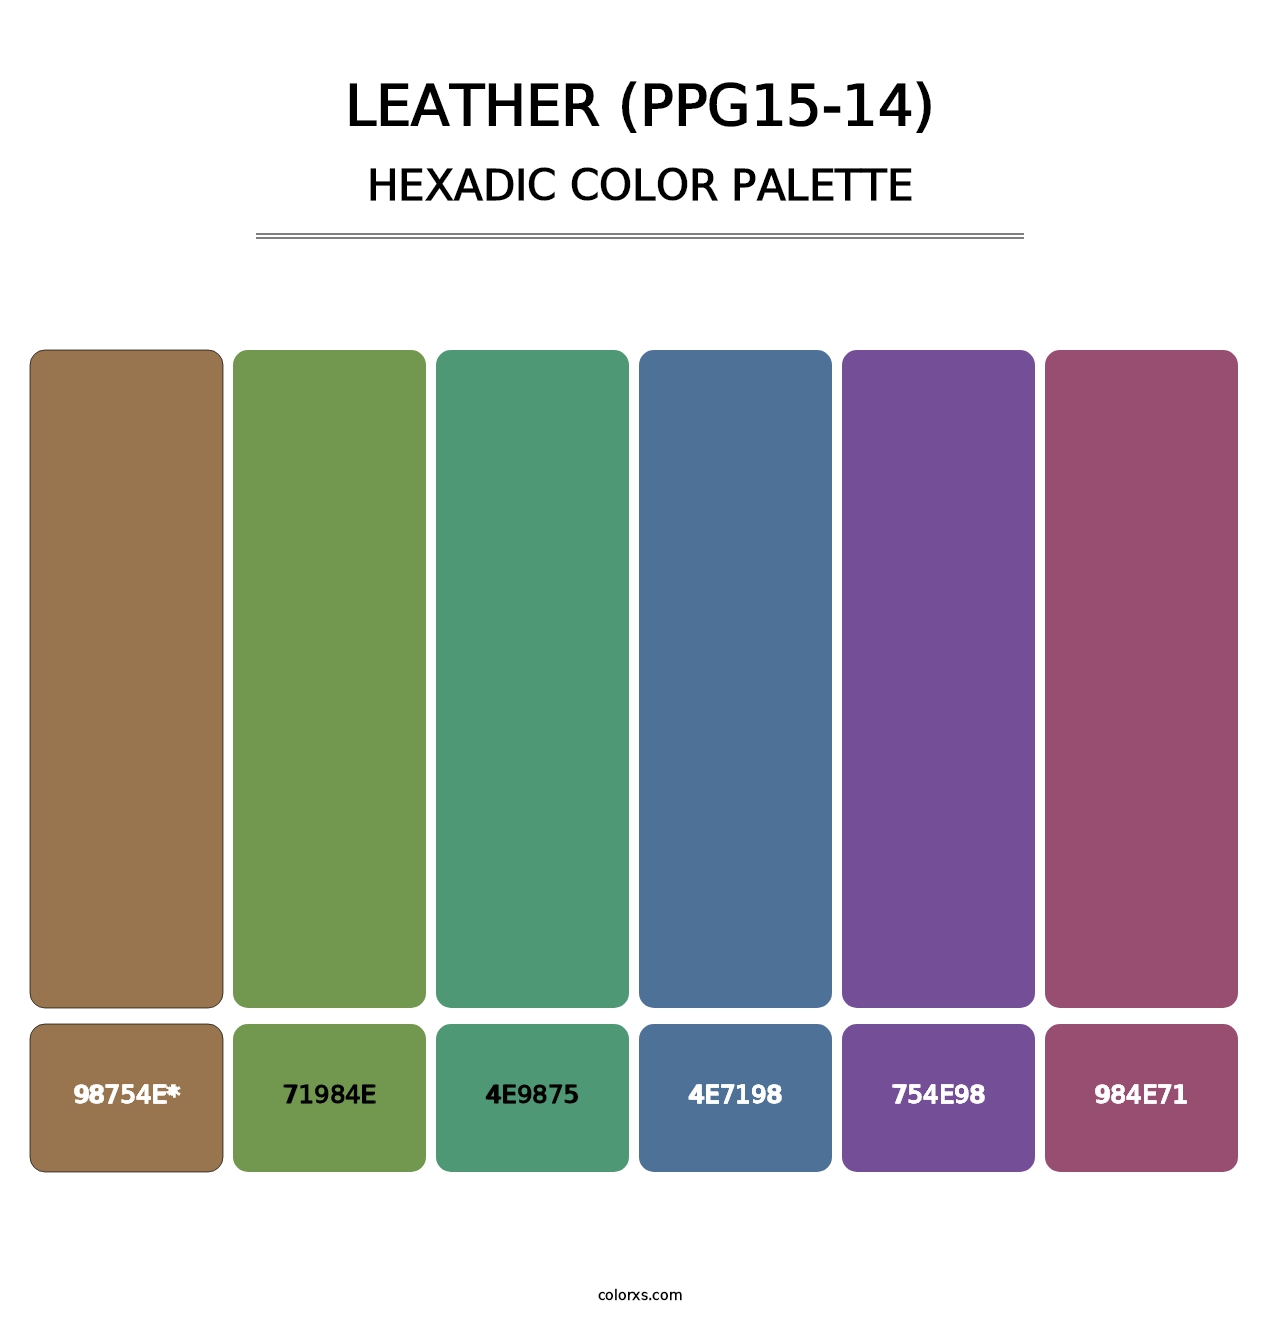 Leather (PPG15-14) - Hexadic Color Palette